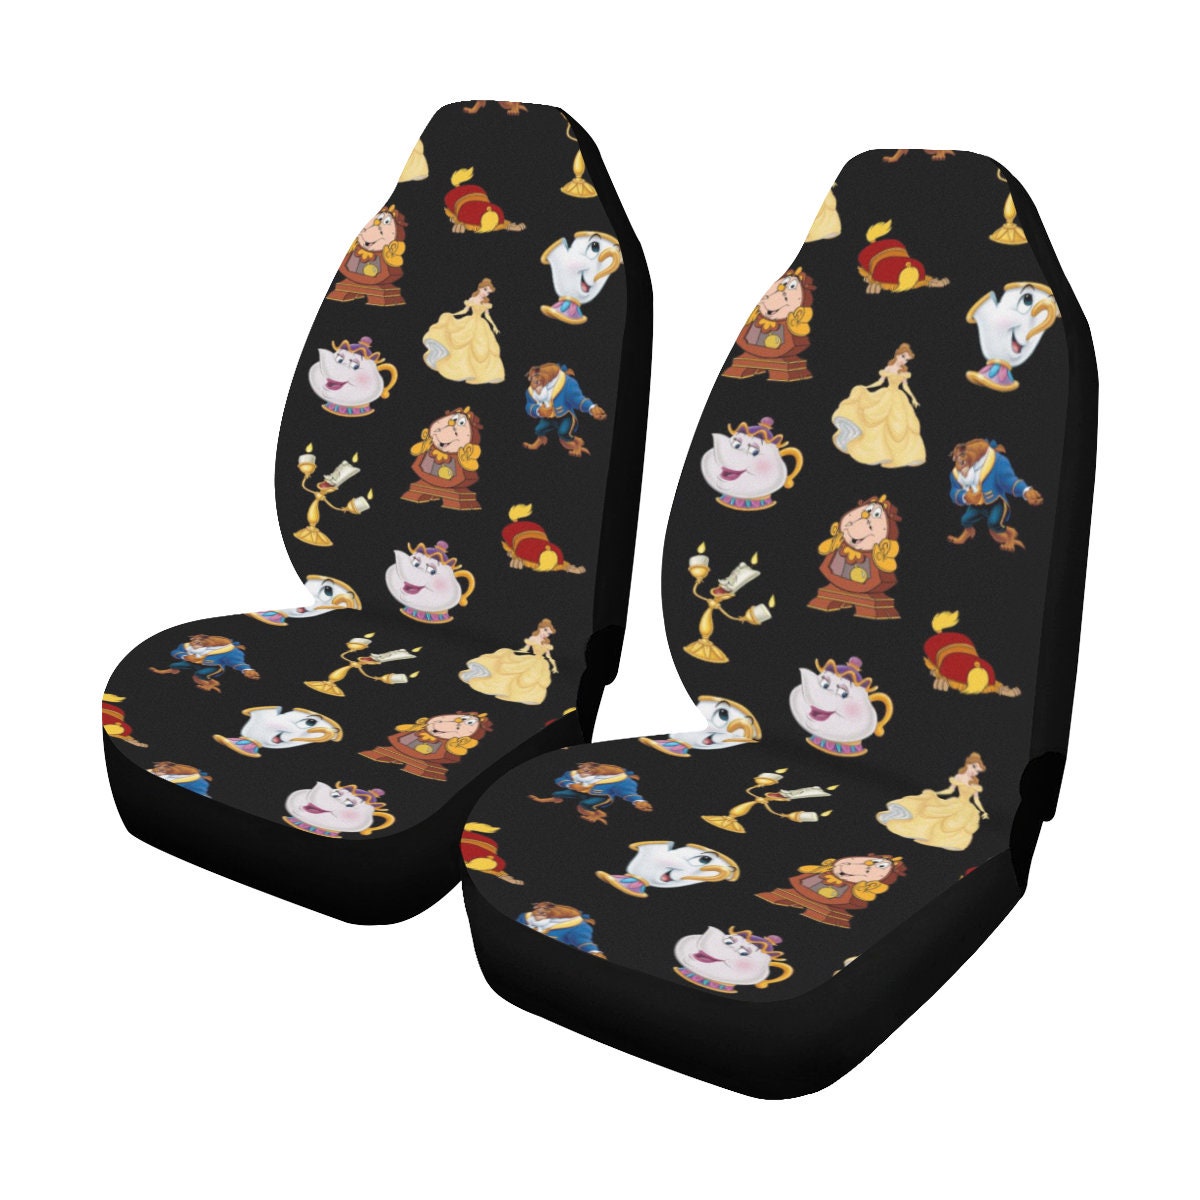 Beauty and the Beast Car Seat Covers | Disney Car Seat Covers